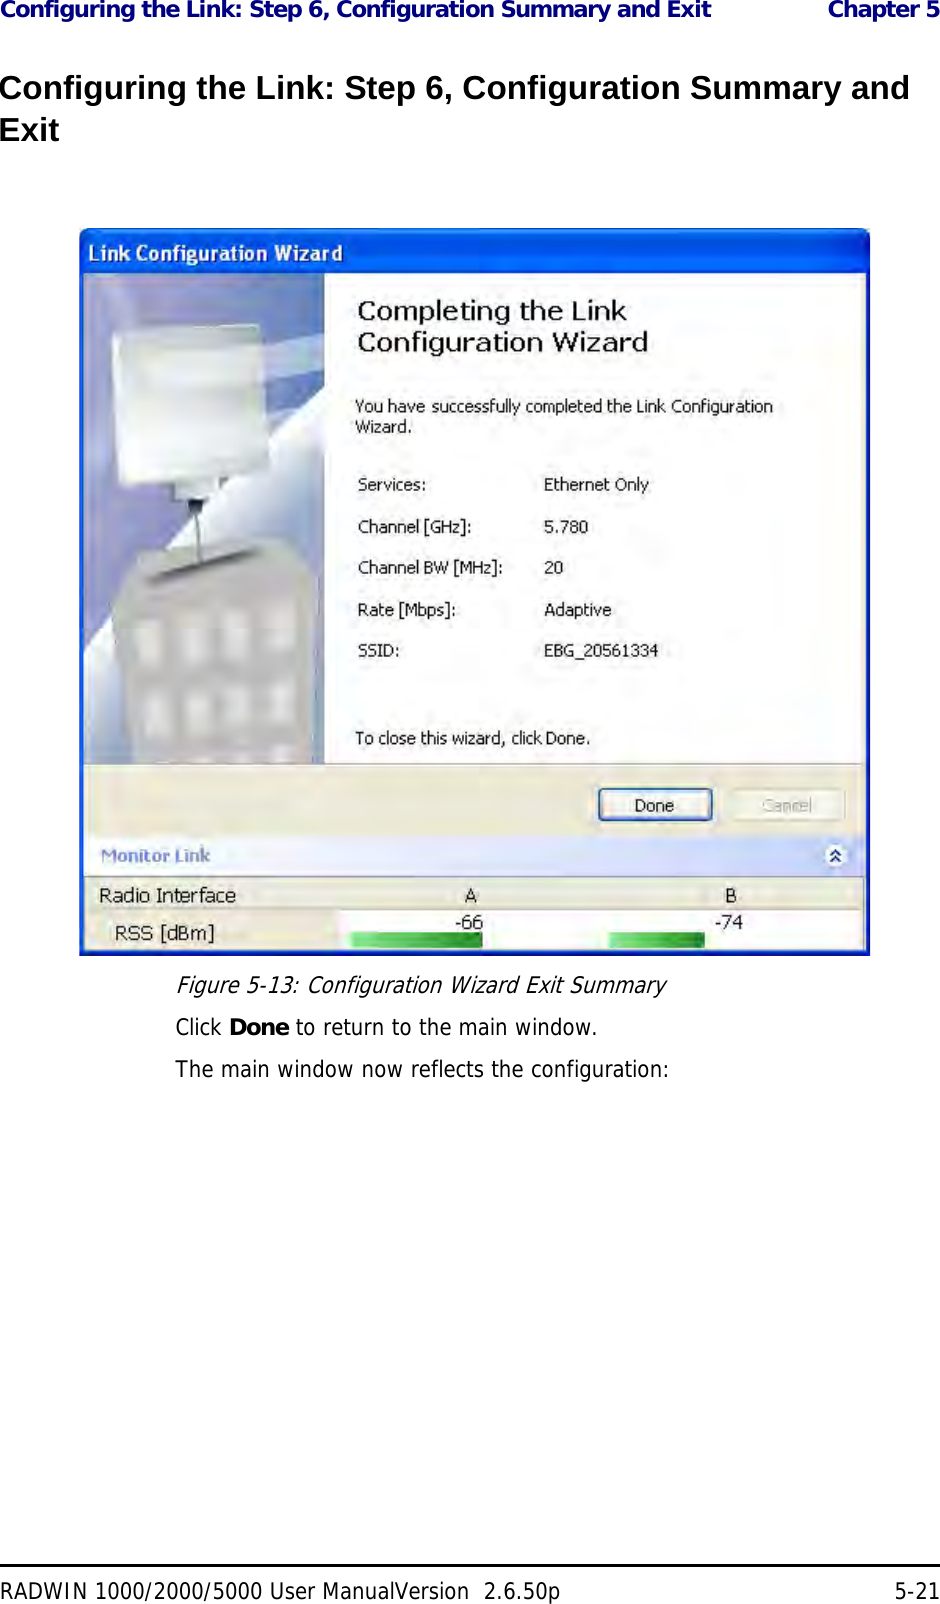 Configuring the Link: Step 6, Configuration Summary and Exit  Chapter 5RADWIN 1000/2000/5000 User ManualVersion  2.6.50p 5-21Configuring the Link: Step 6, Configuration Summary and ExitFigure 5-13: Configuration Wizard Exit Summary Click Done to return to the main window.The main window now reflects the configuration: